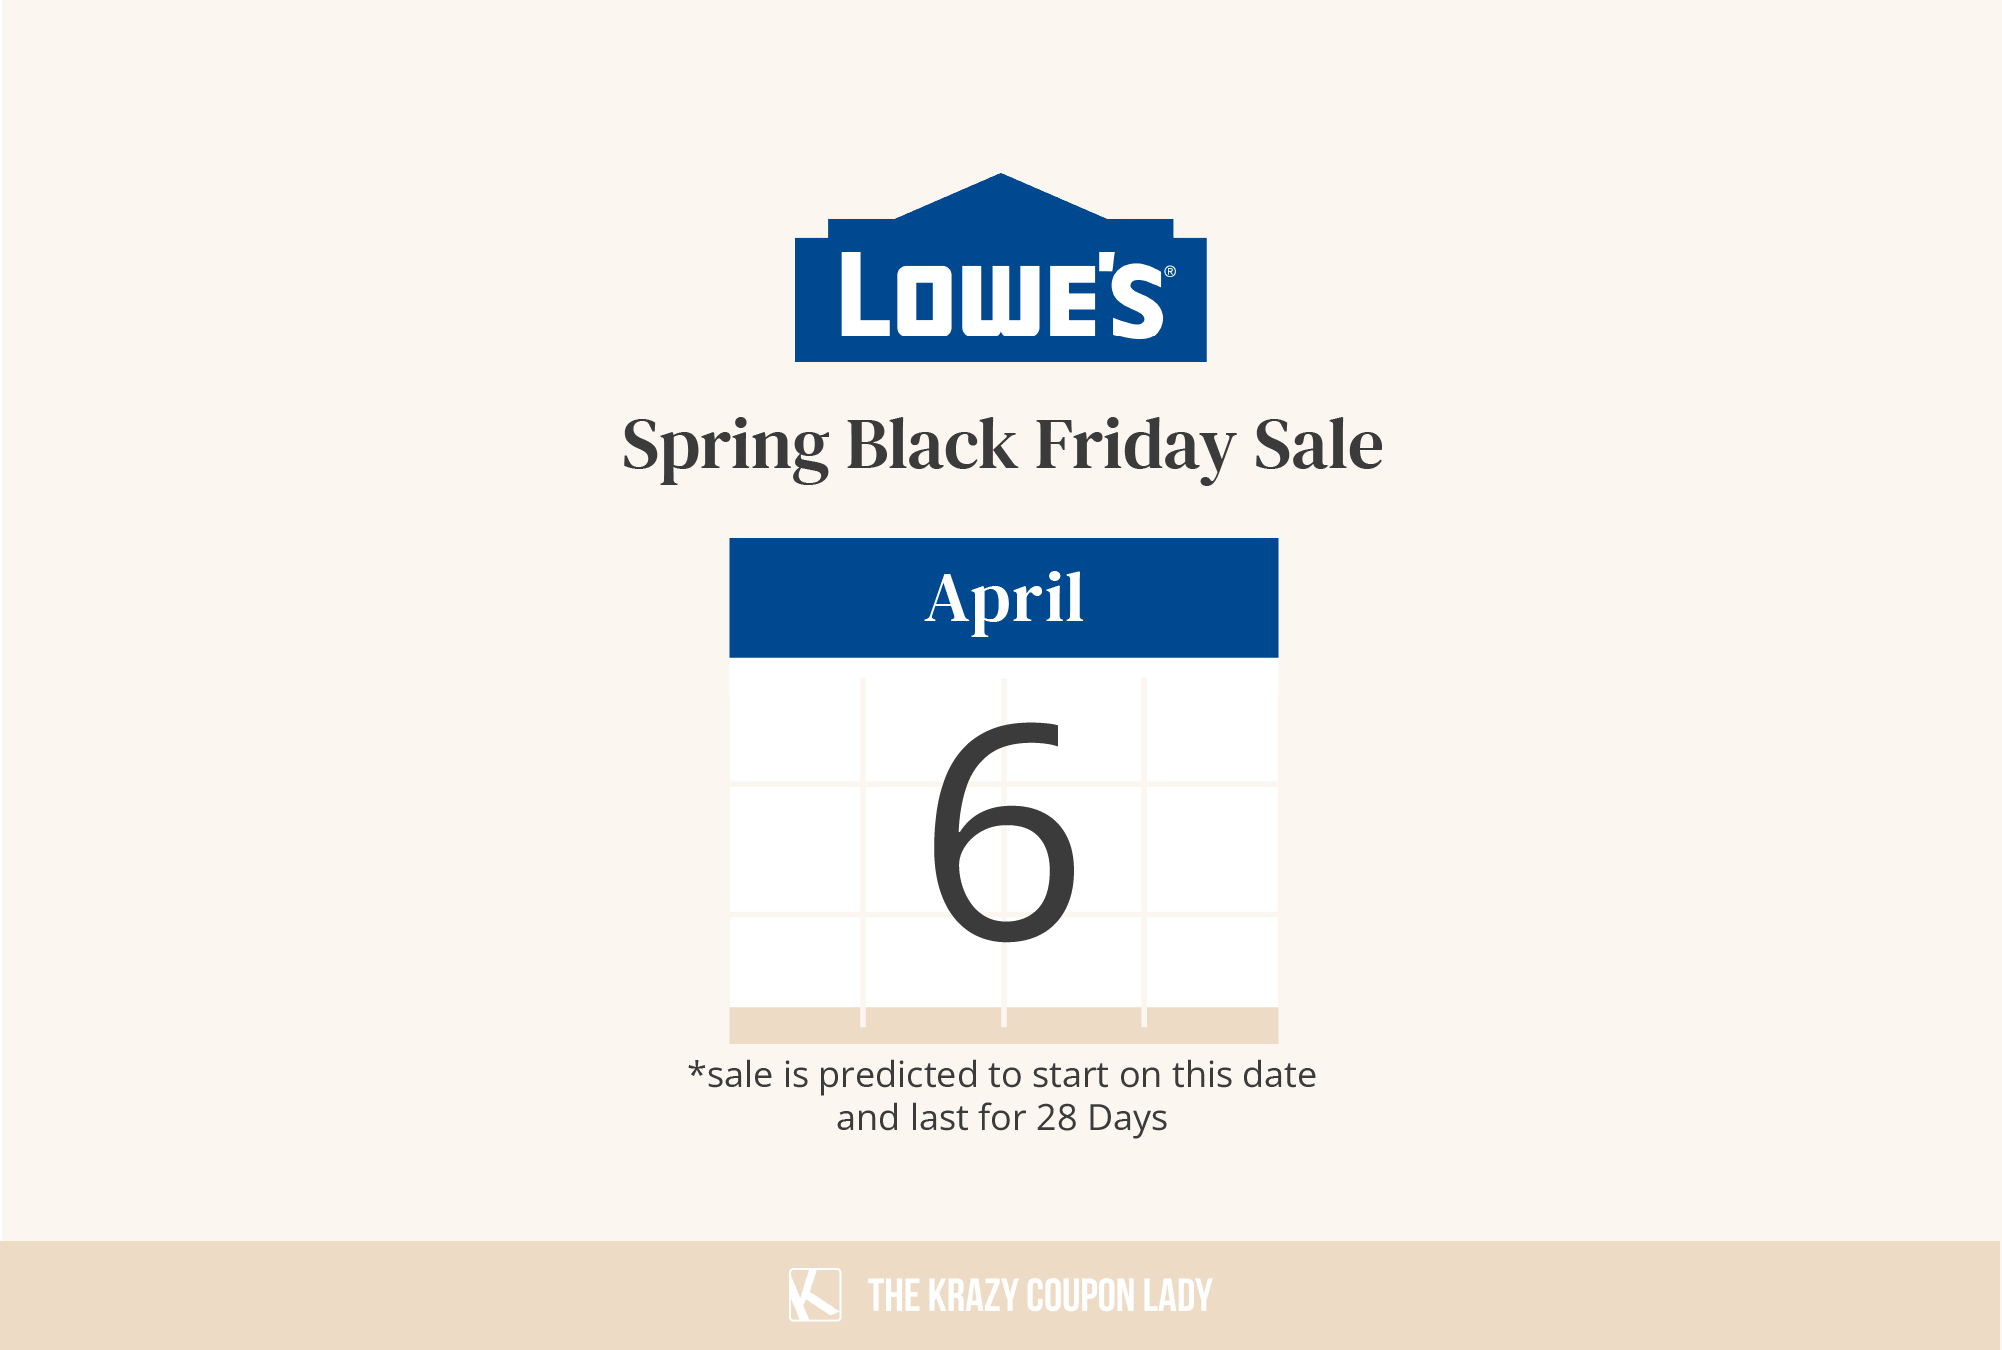 A graphic showing the predicted start date of the Lowe's Springfest sale of 2023 to be April 6th